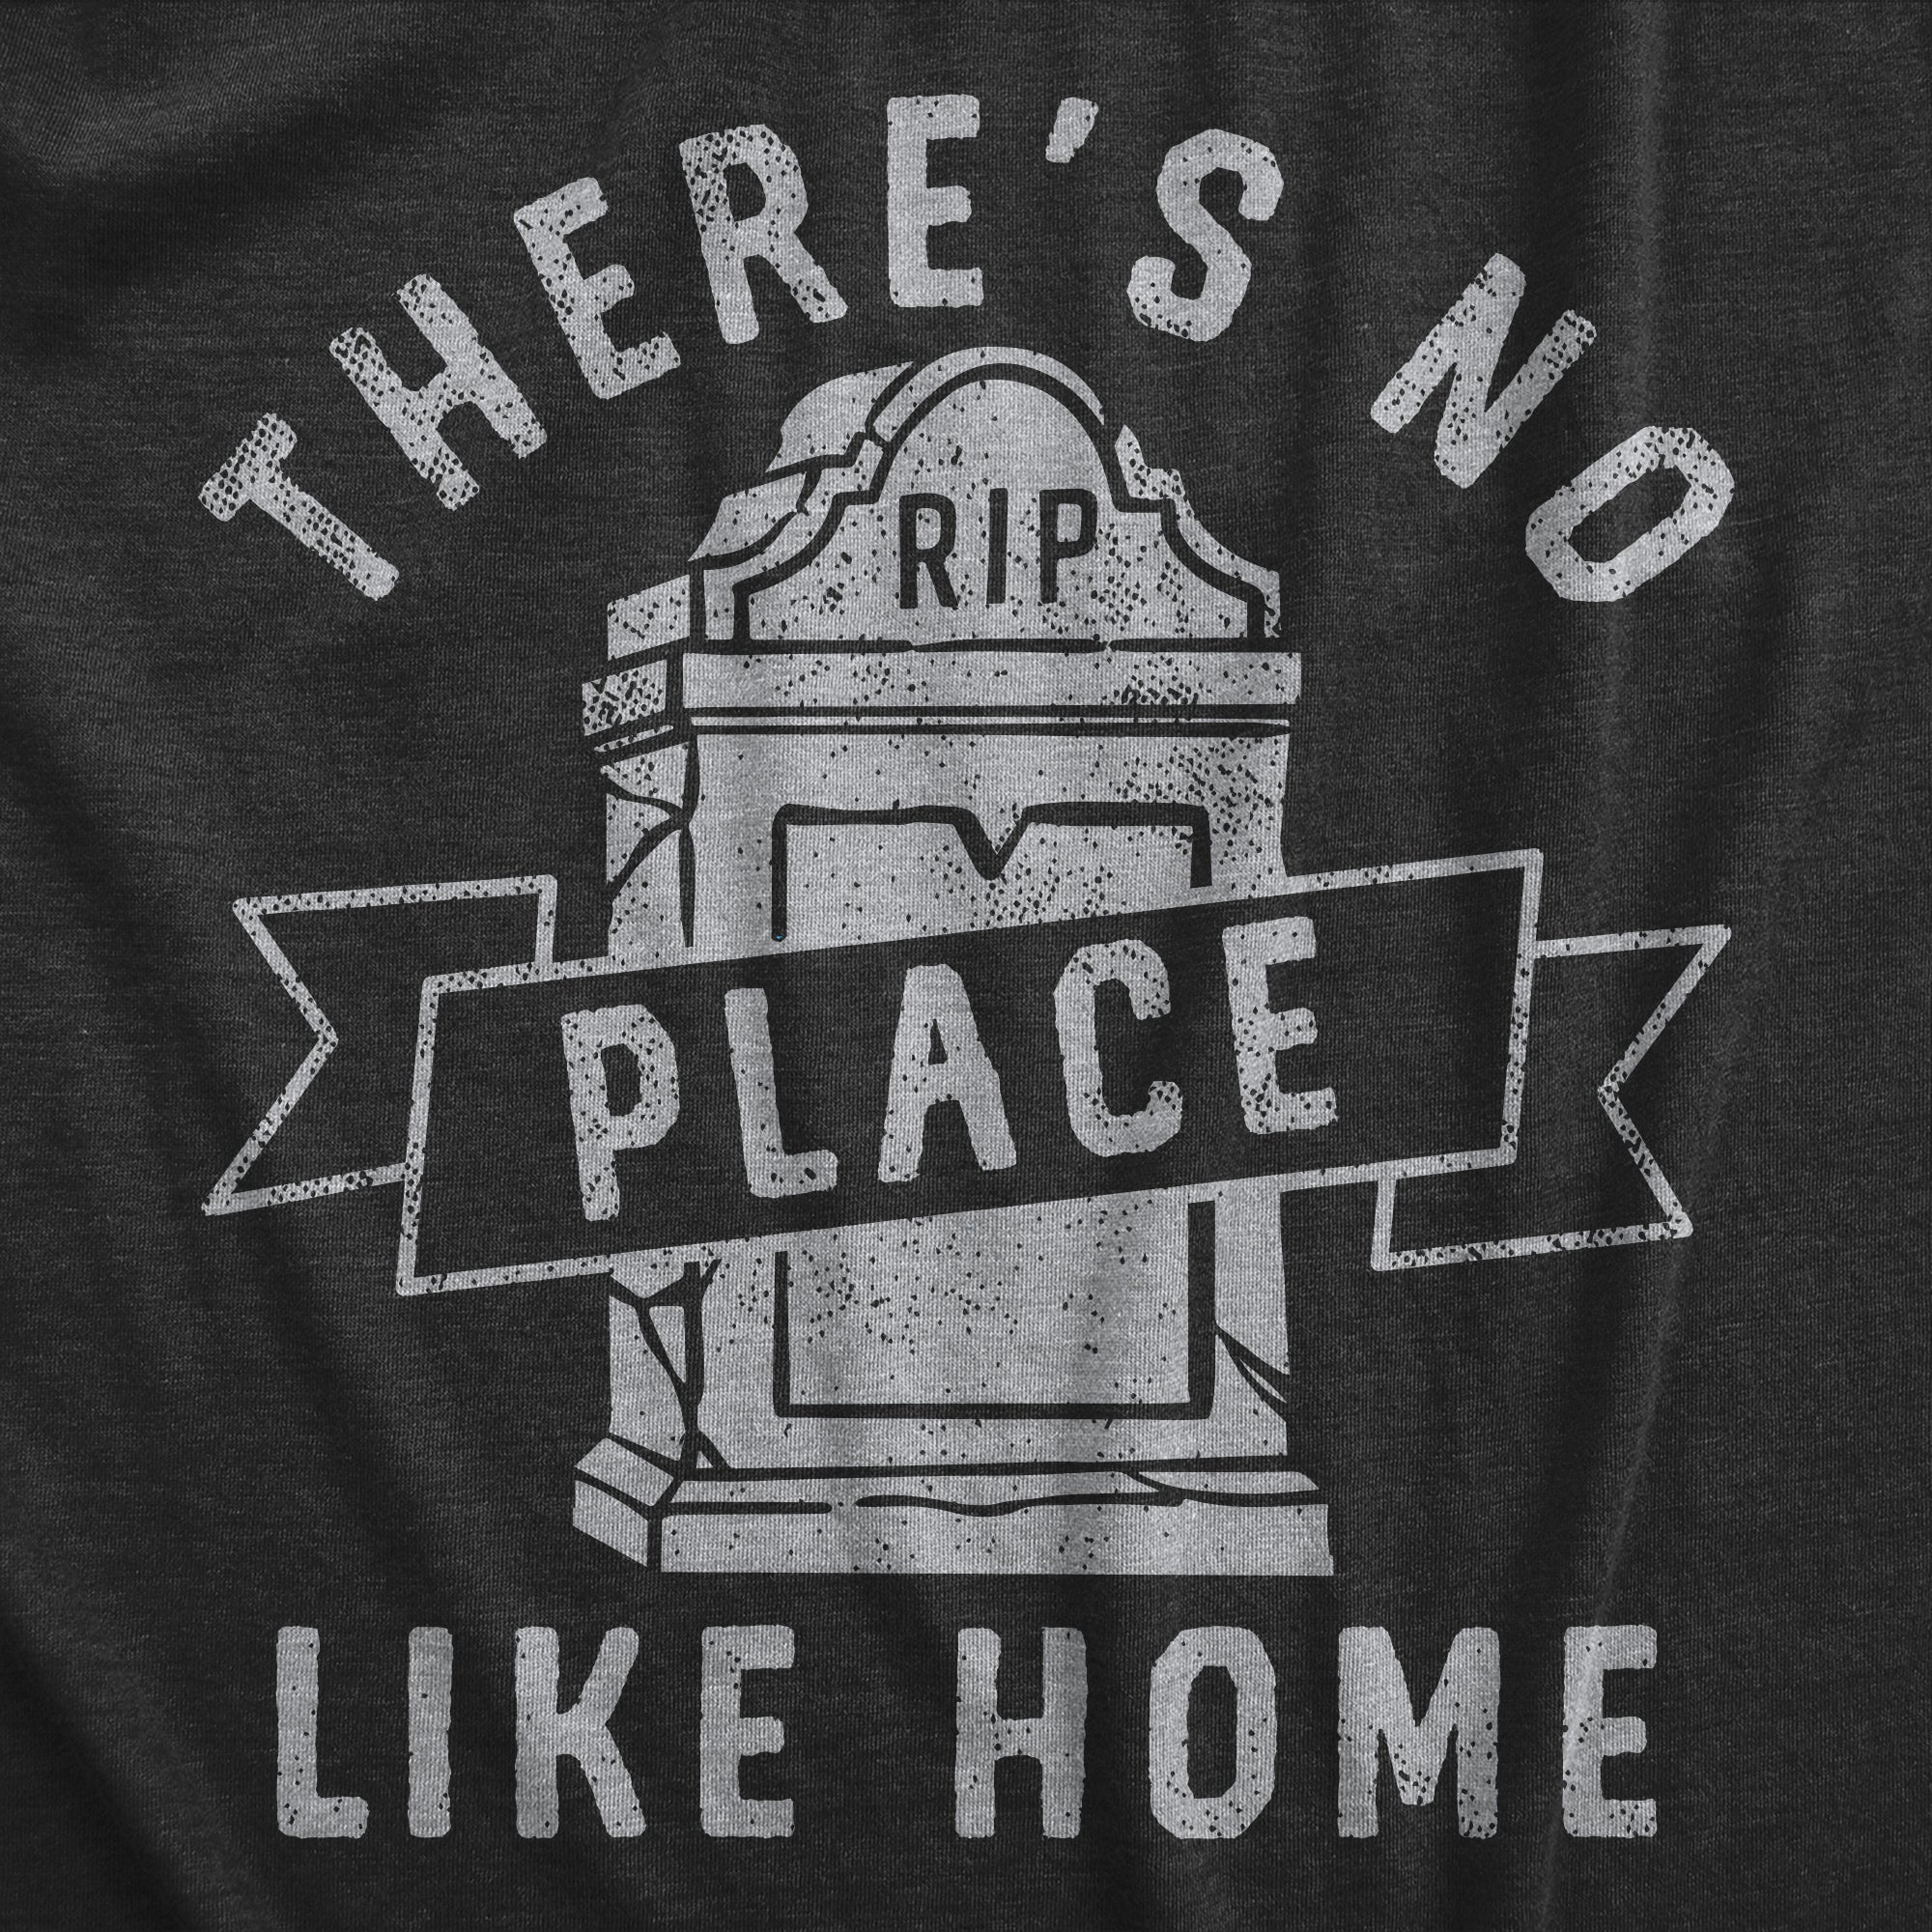 Funny Heather Black - HOME Theres No Place Like Home Mens T Shirt Nerdy Halloween Sarcastic Tee